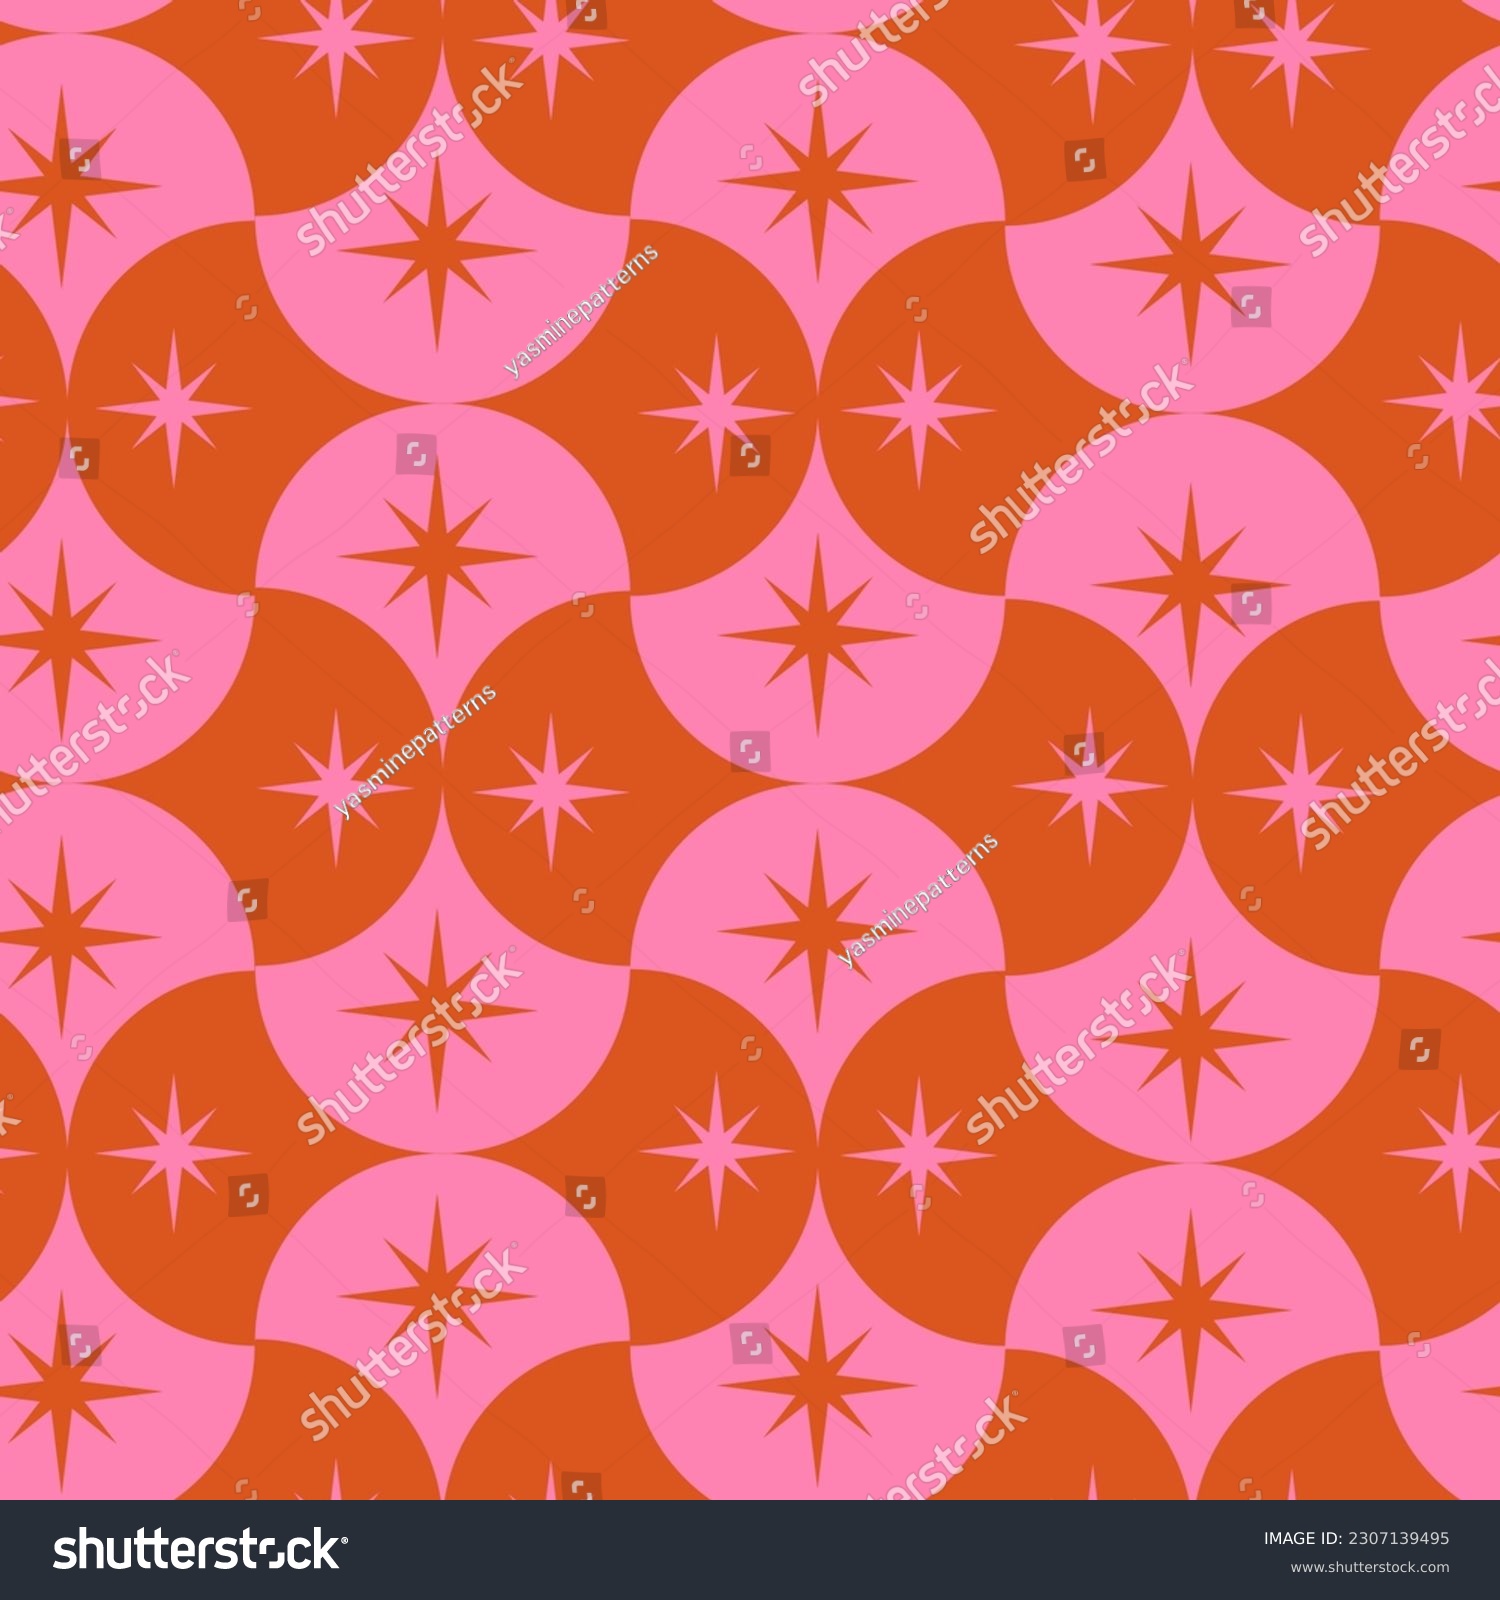 SVG of Pink and orange mid century starbursts on scallop  geometric shapes seamless pattern. For fabric, wallpaper, home decor  svg